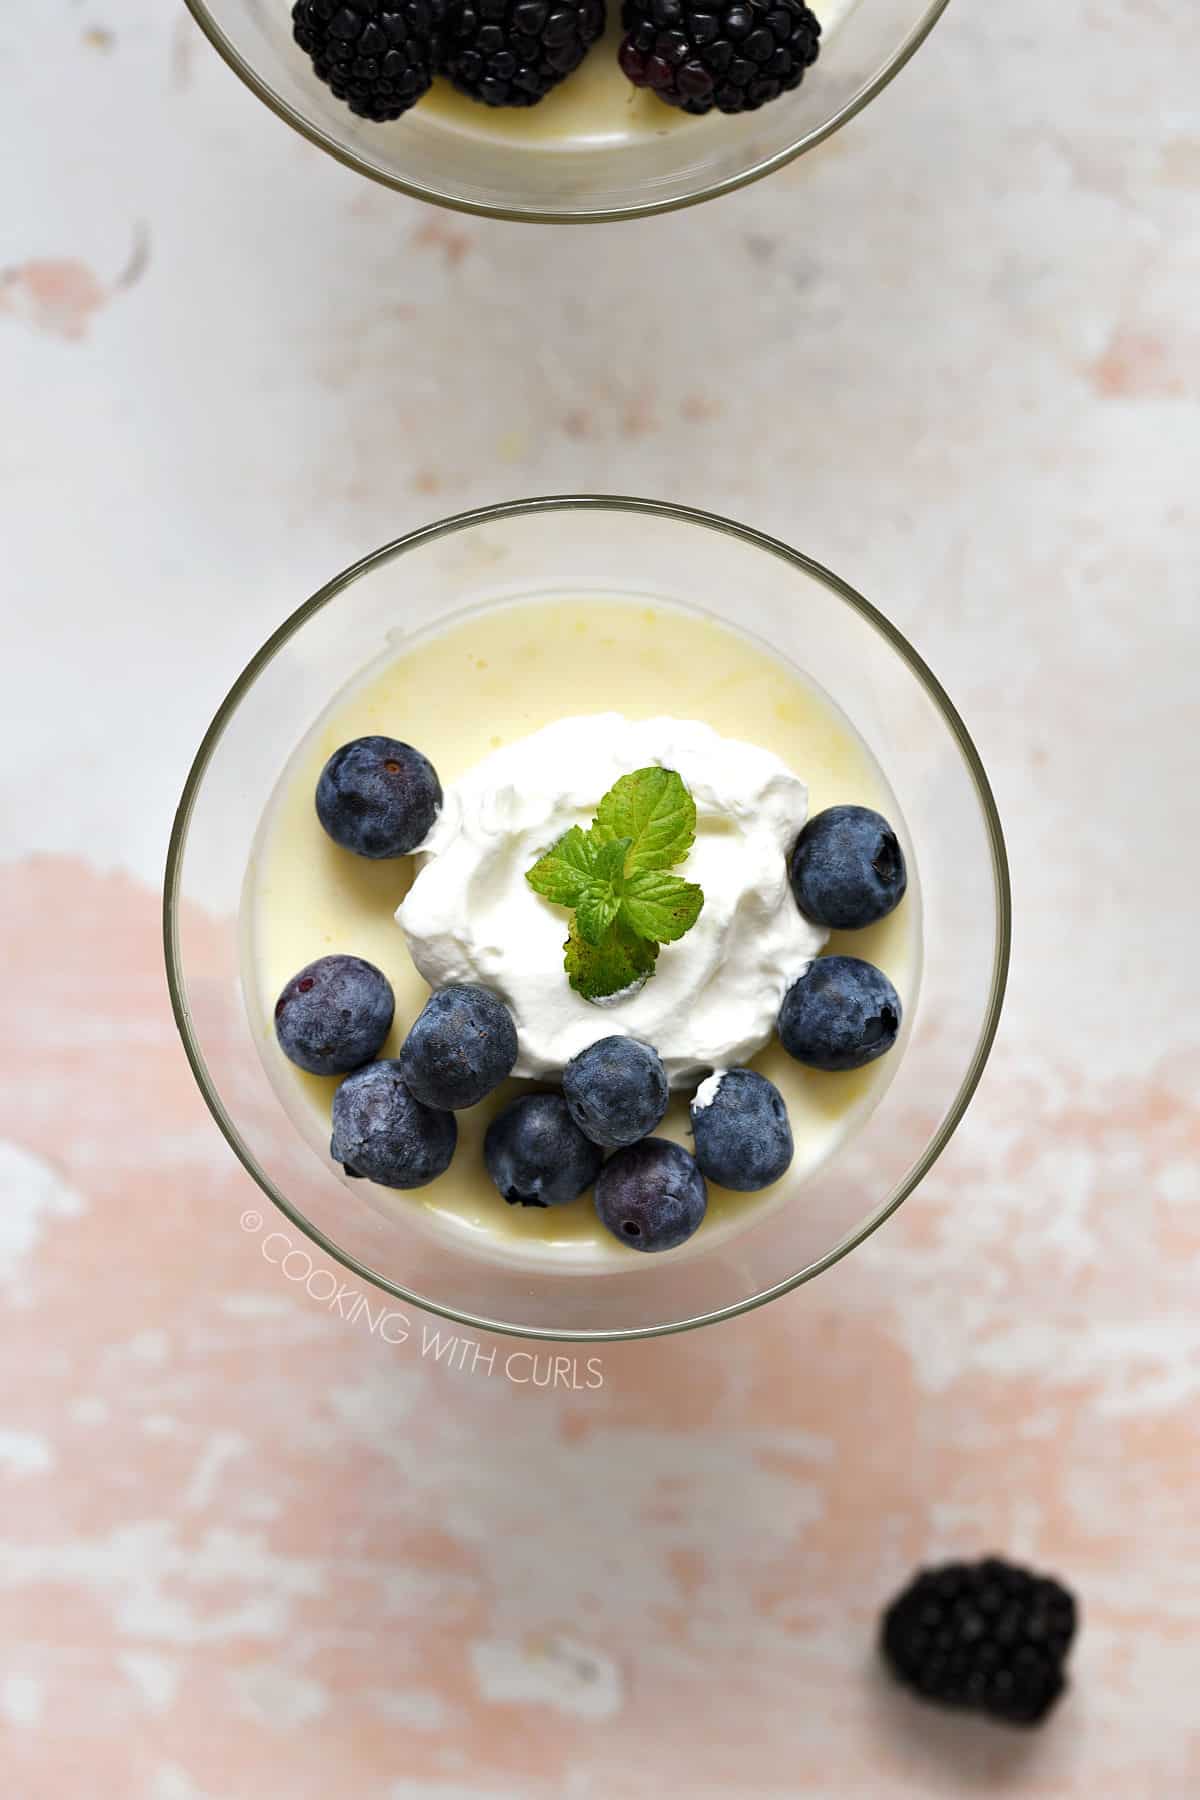 Looking down on a clear dessert glass filled with lemon custard and topped with whipped cream and blueberries.